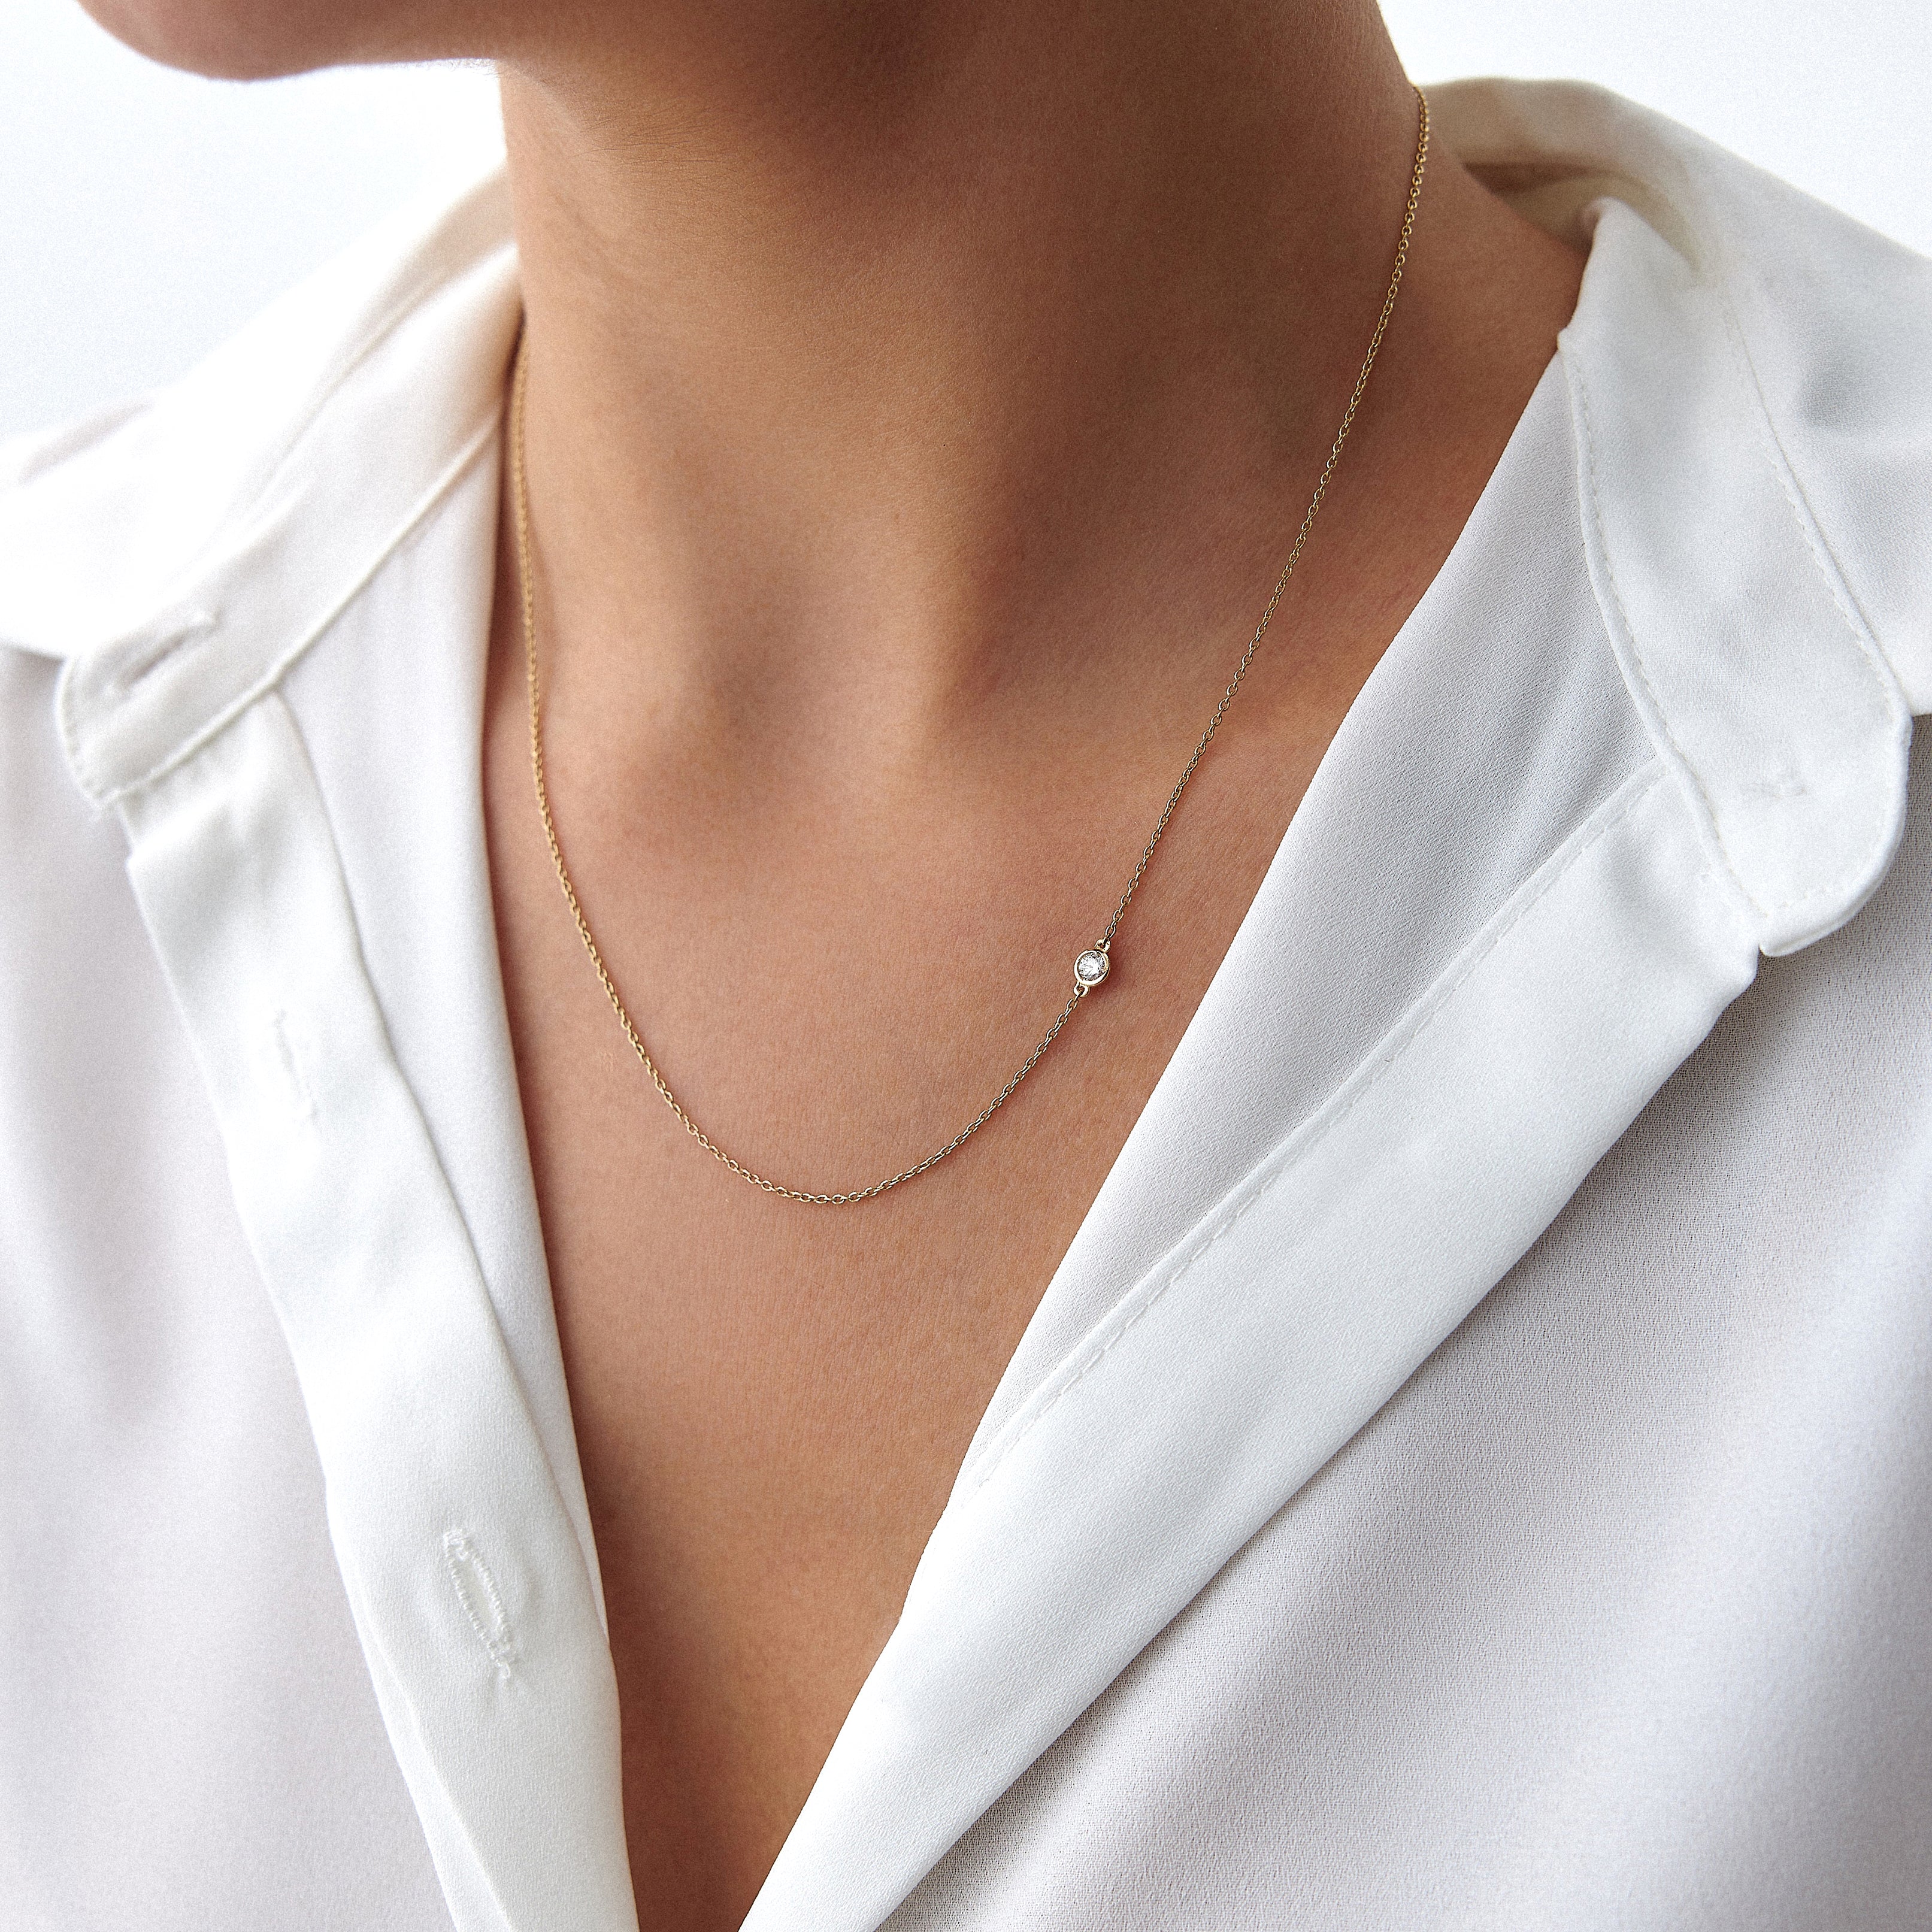 Asymmetric Diamond Necklace Available in 14K and 18K Gold